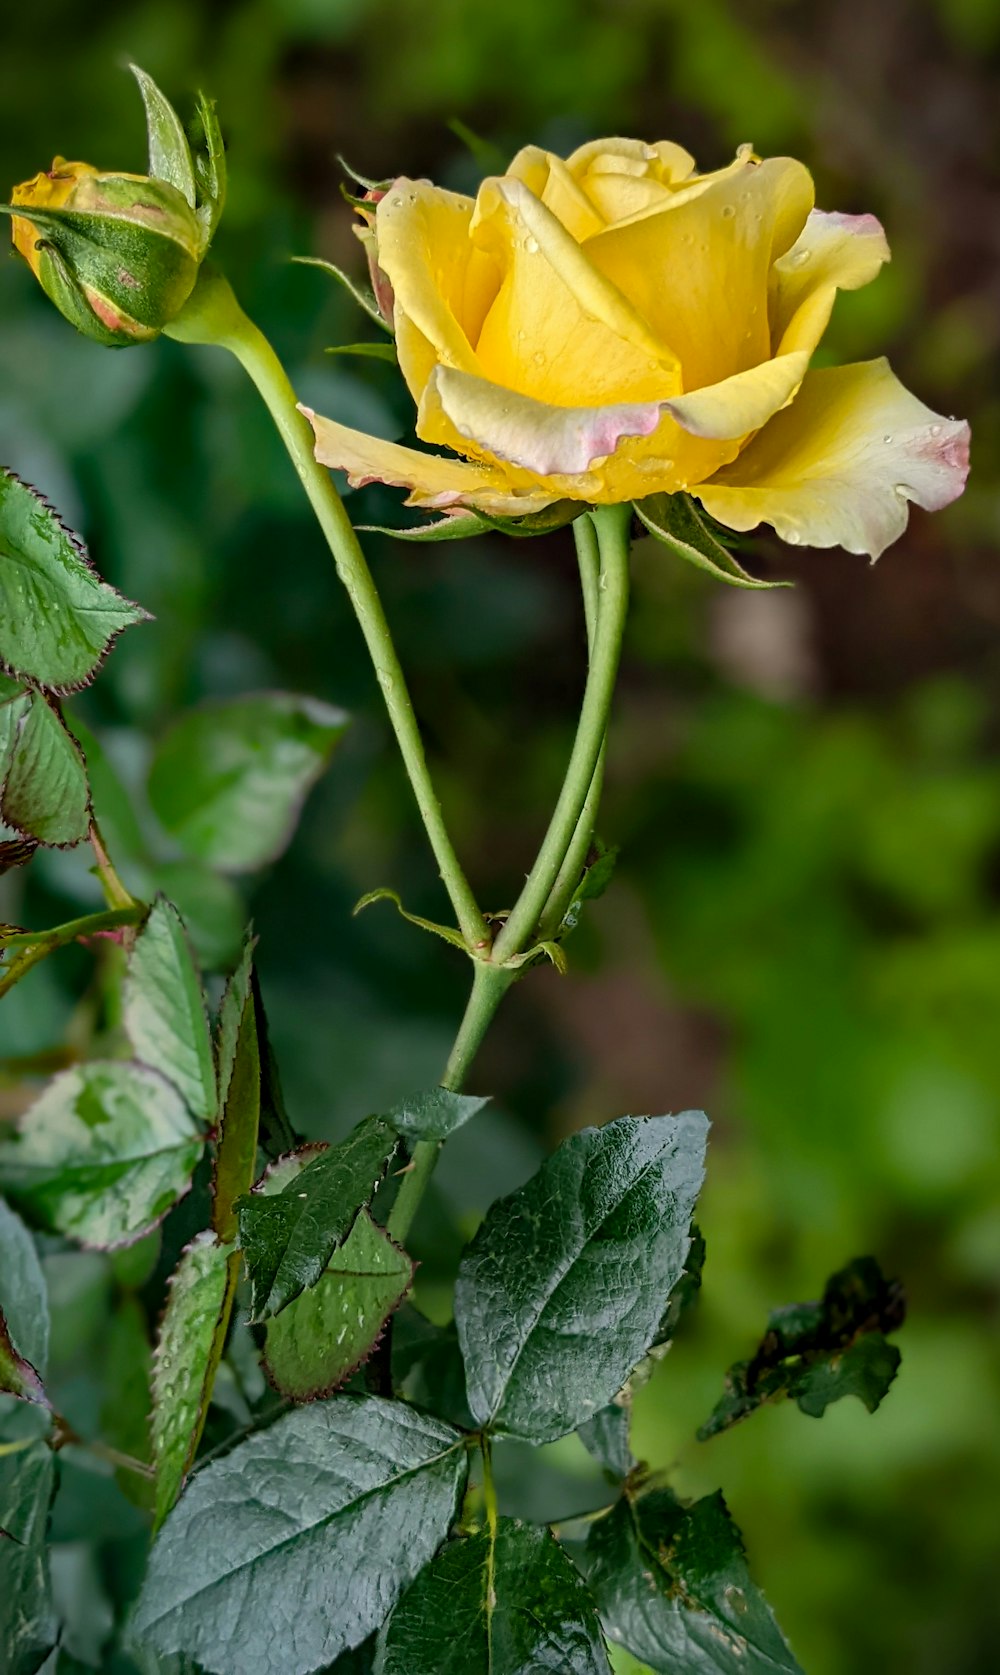 a yellow rose with green leaves in the foreground